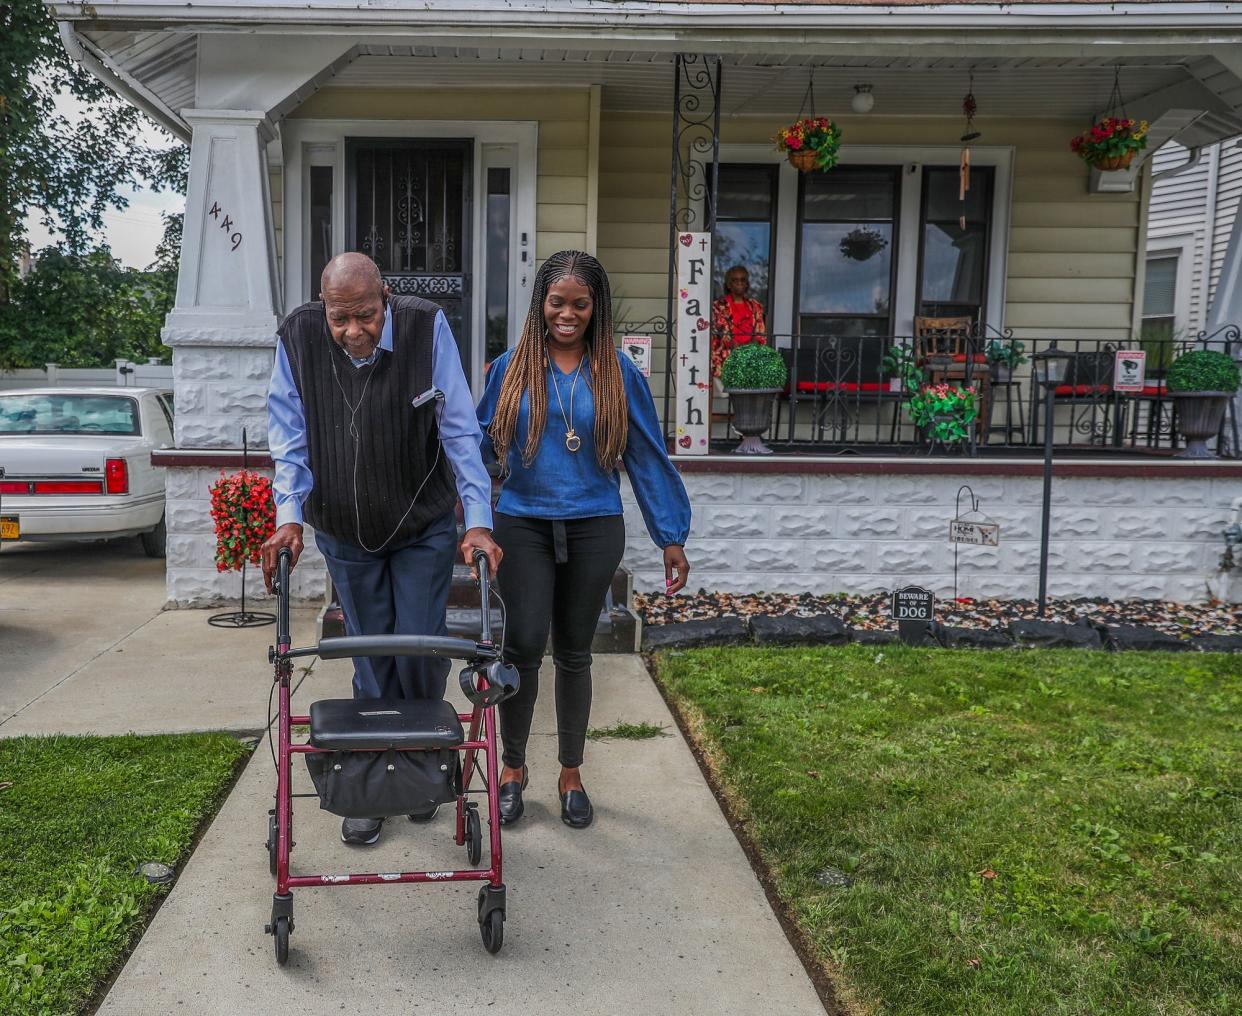 Myzette Howell spots her father Percy Howell as they take a walk around their neighborhood in Buffalo.